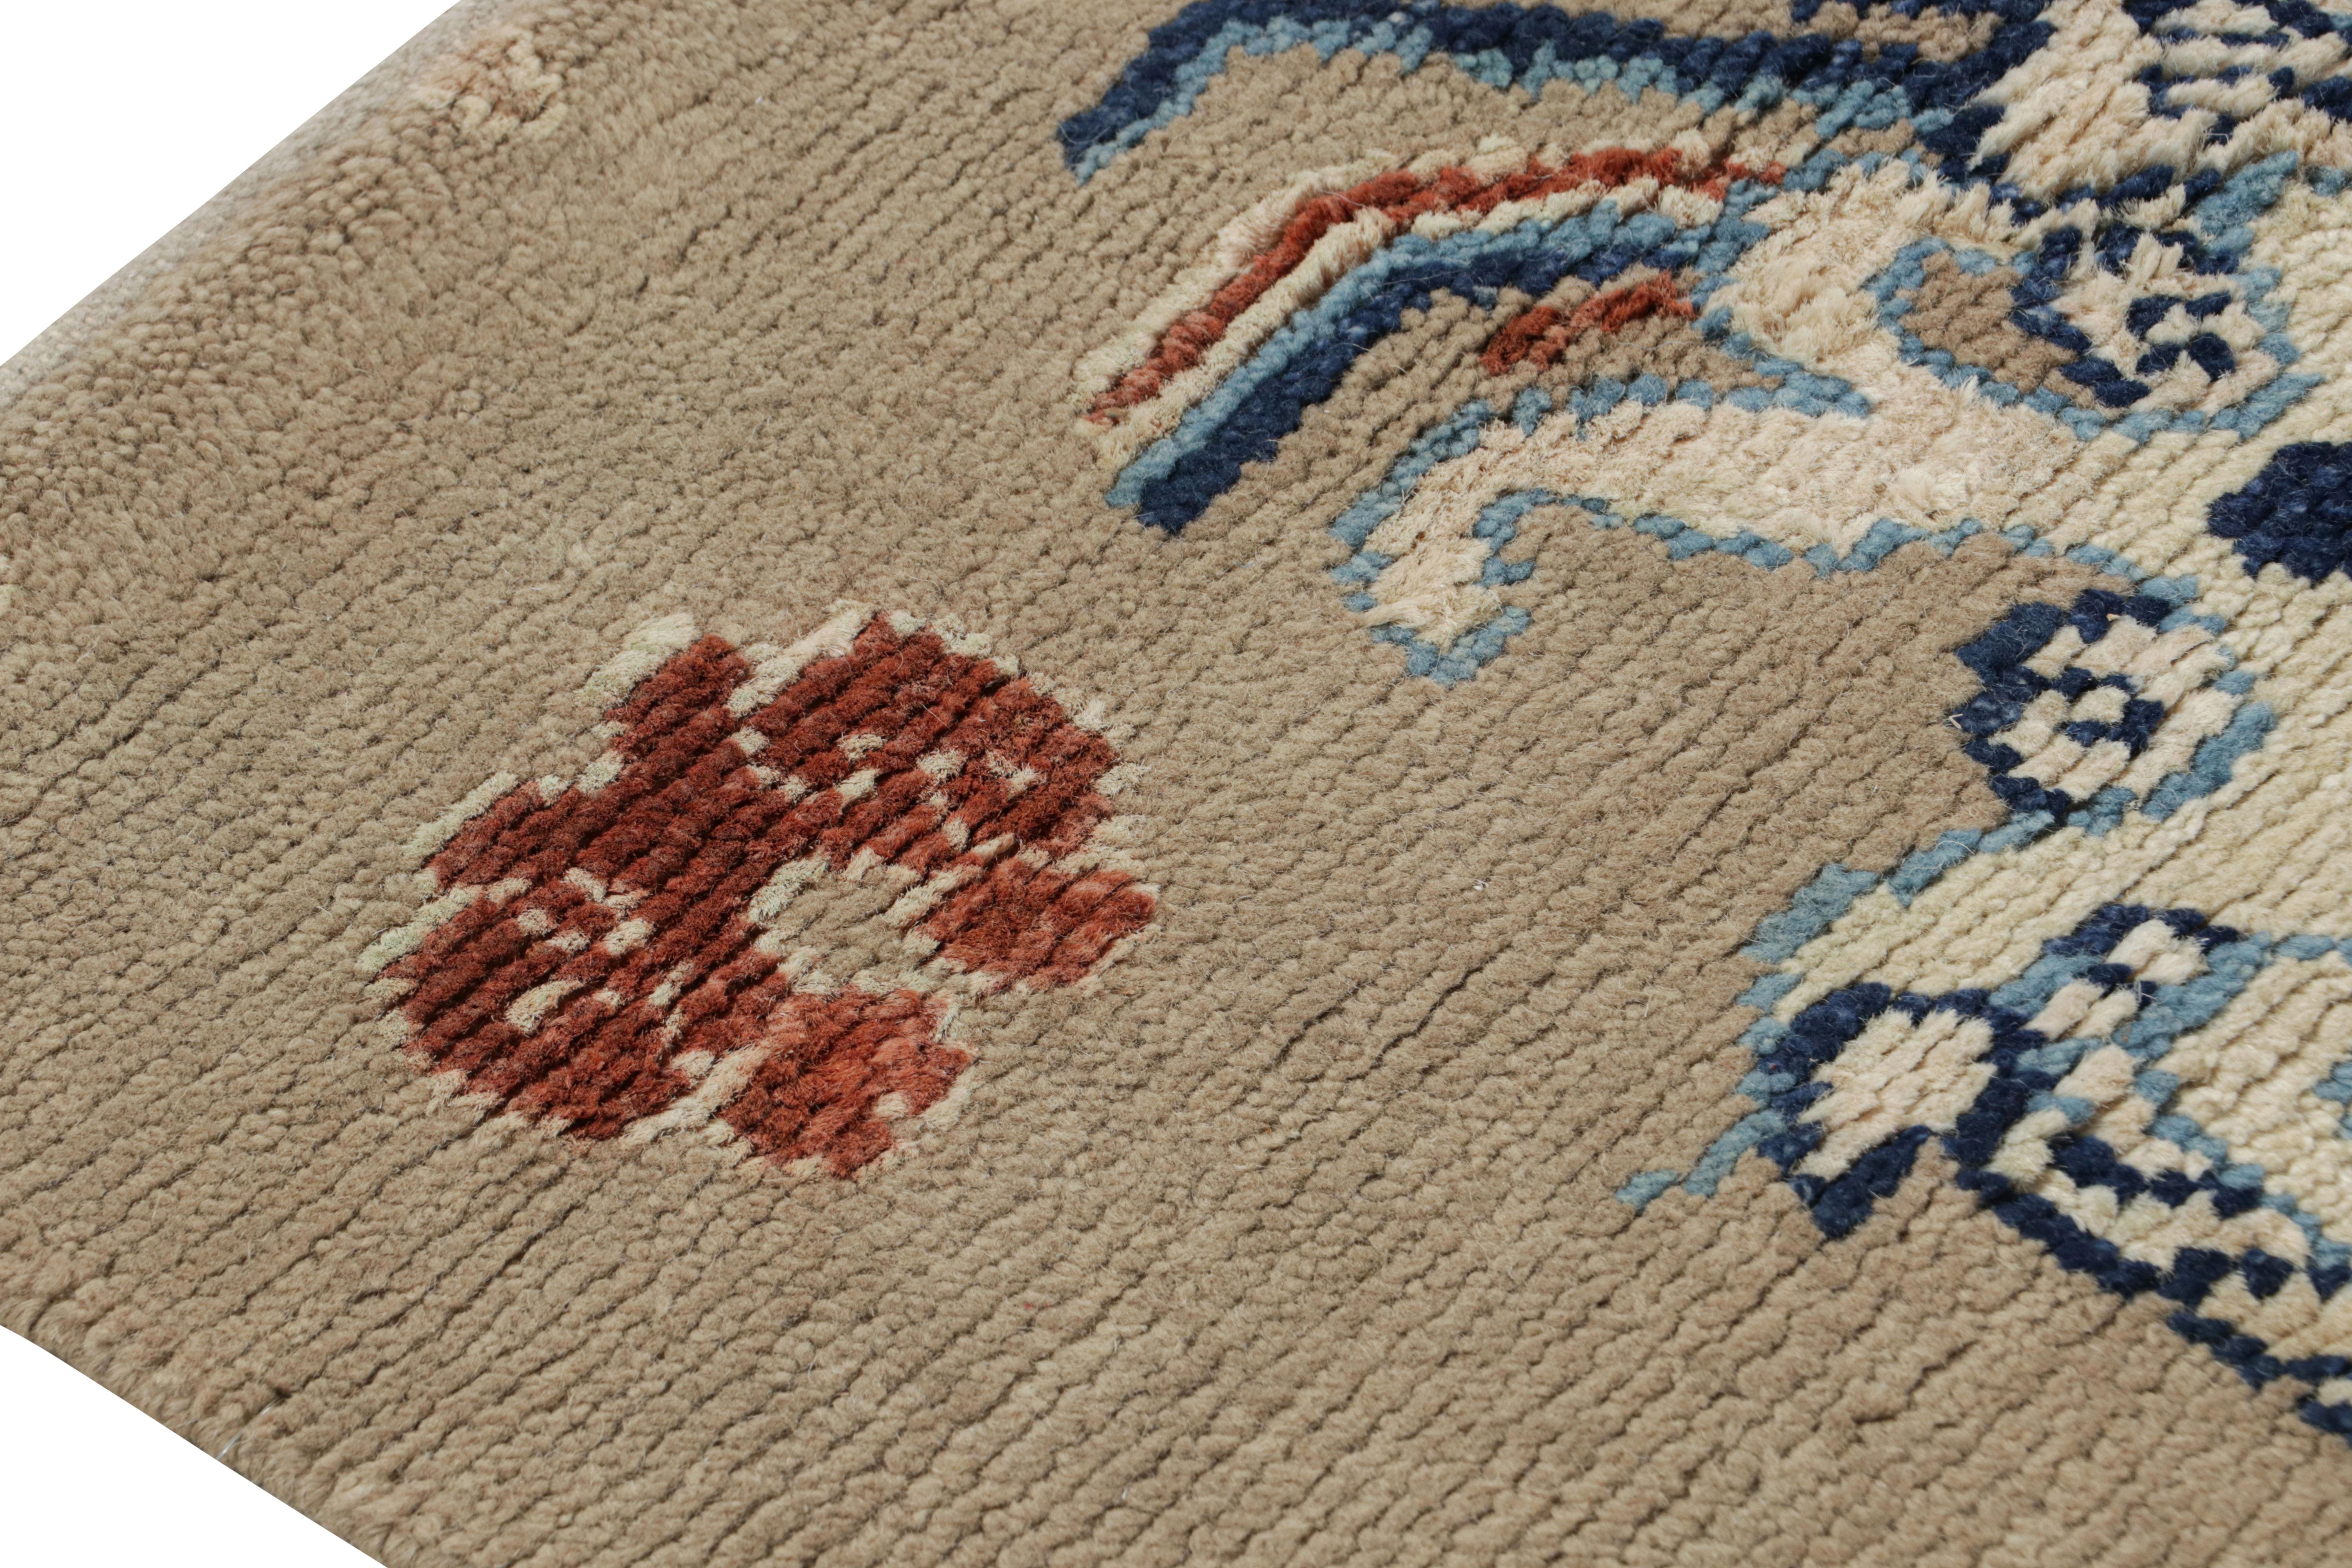 Hand-Knotted Rug & Kilim’s Dragon Pictorial Runner Rug In Beige, Orange and Blue Tones For Sale